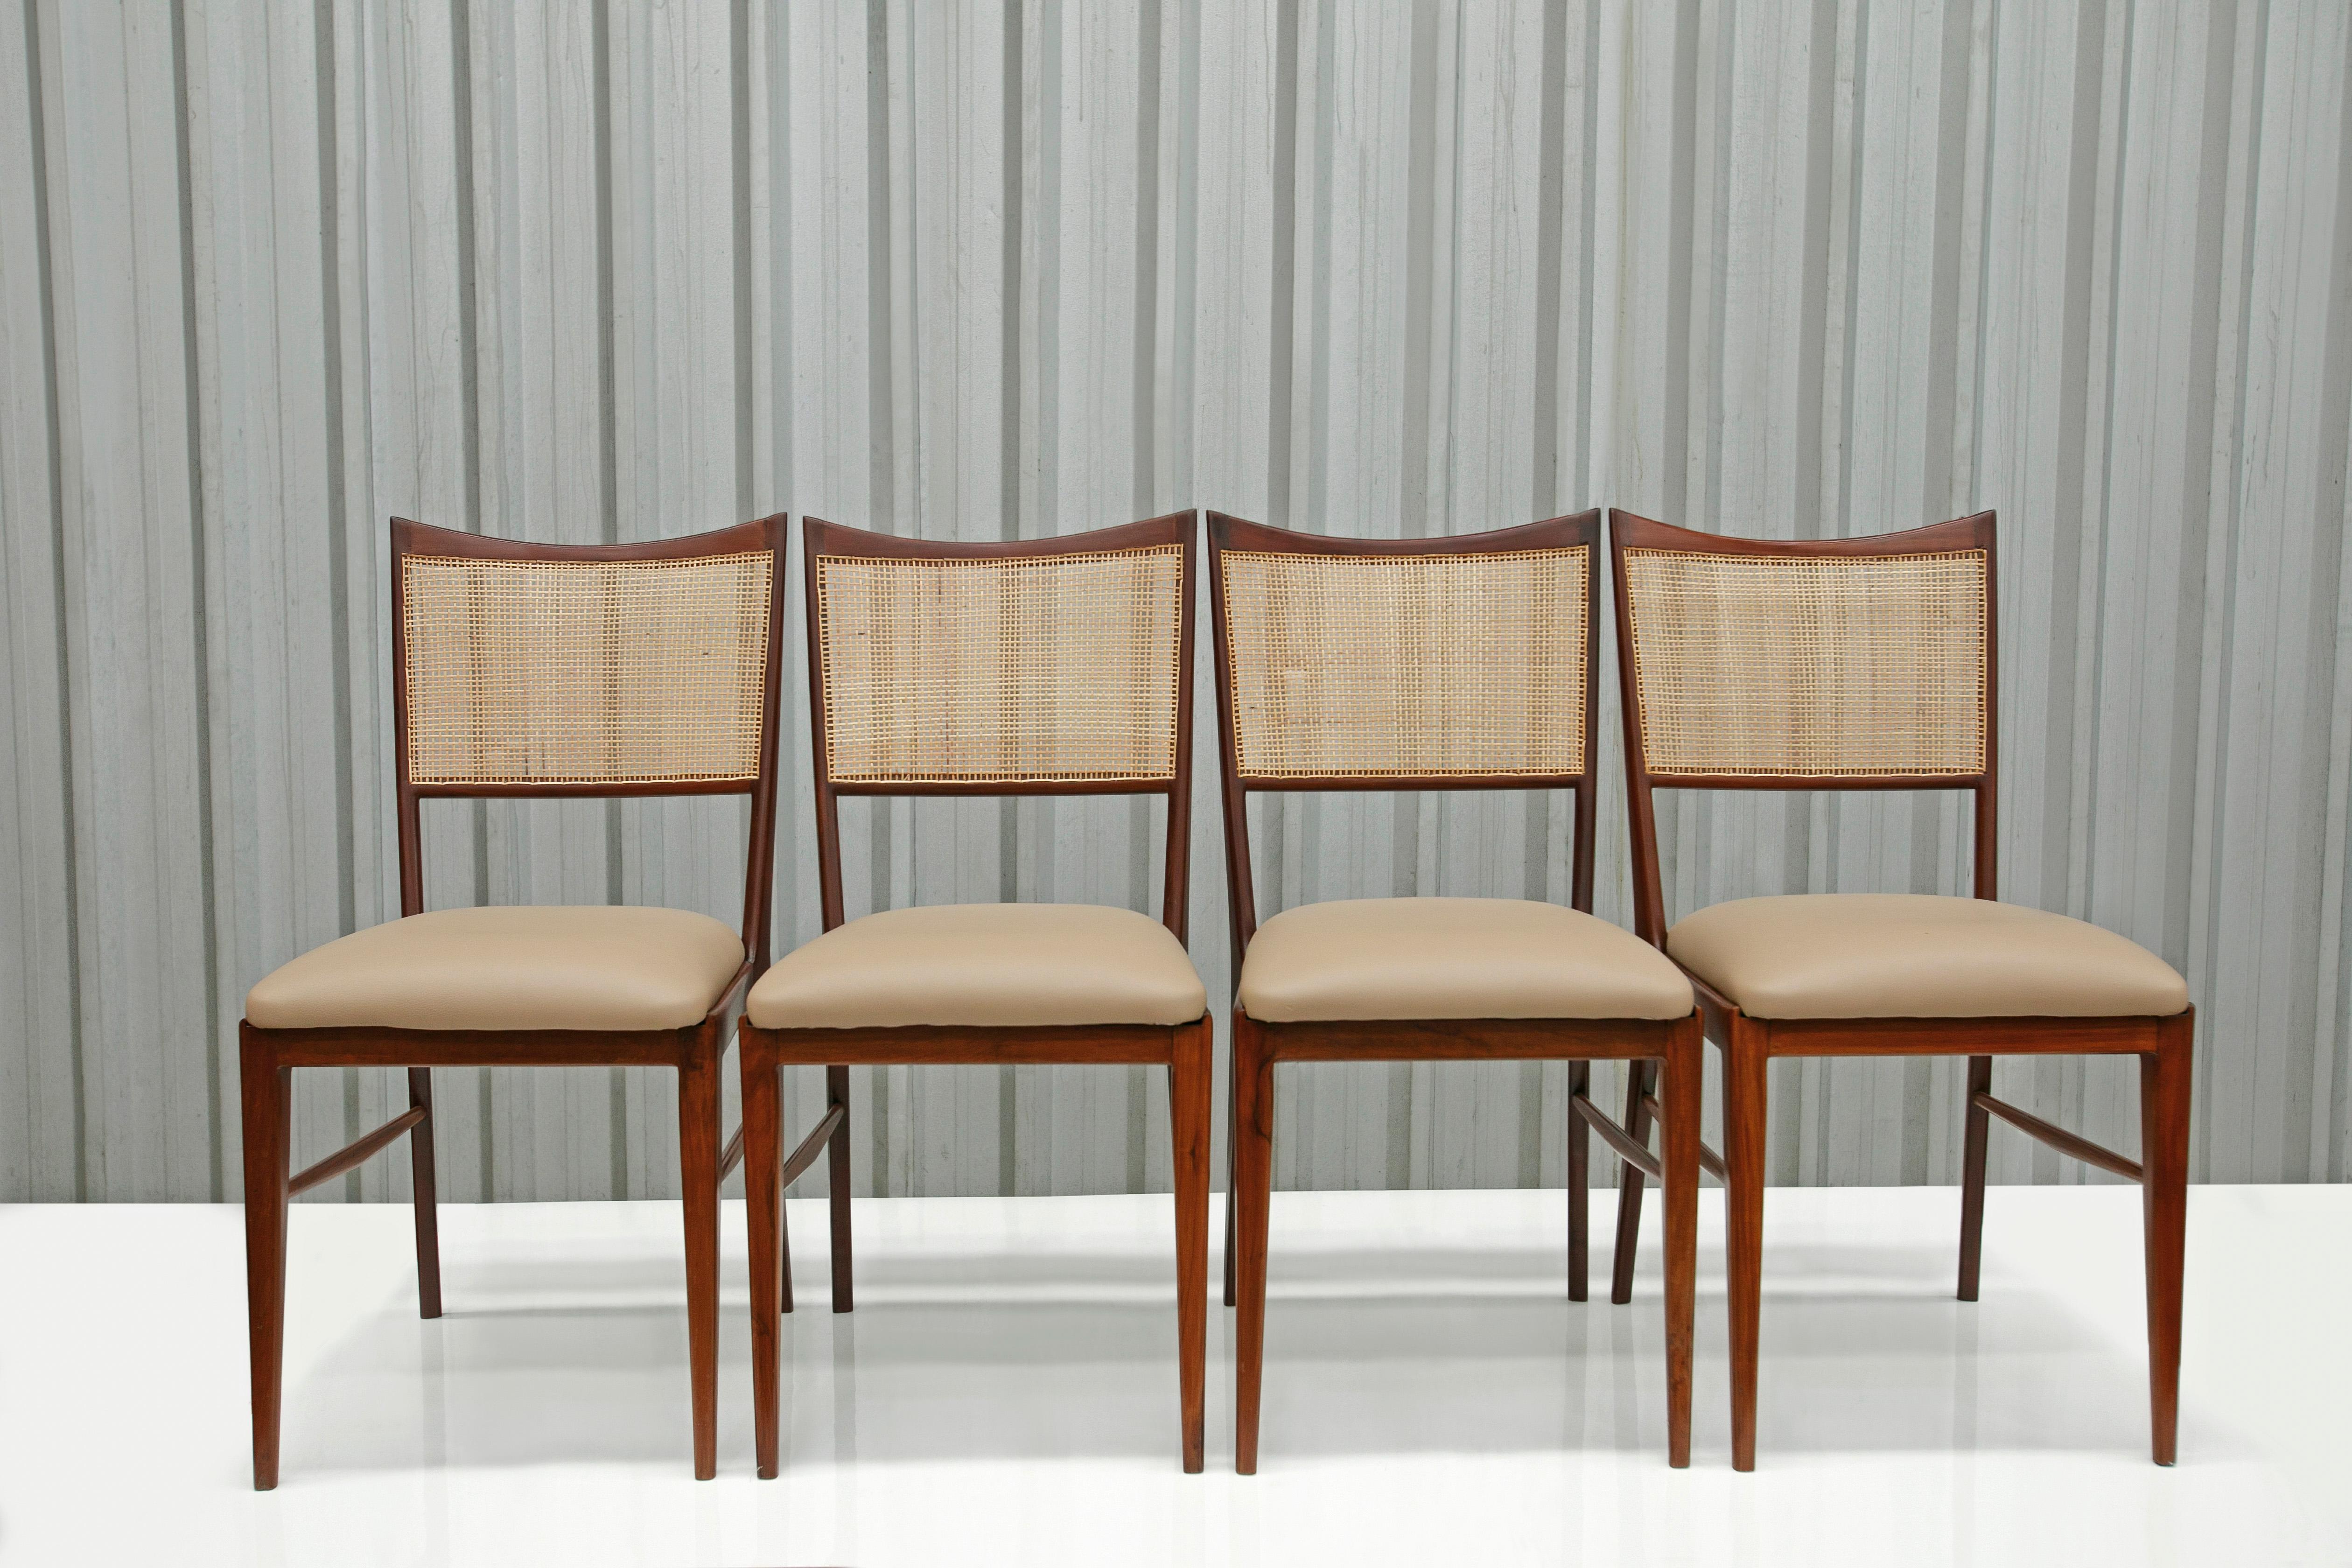 Mid-Century Modern Brazilian Modern Set of Four Chairs in Hardwood & Beige Leather, Unknown, 1960s For Sale